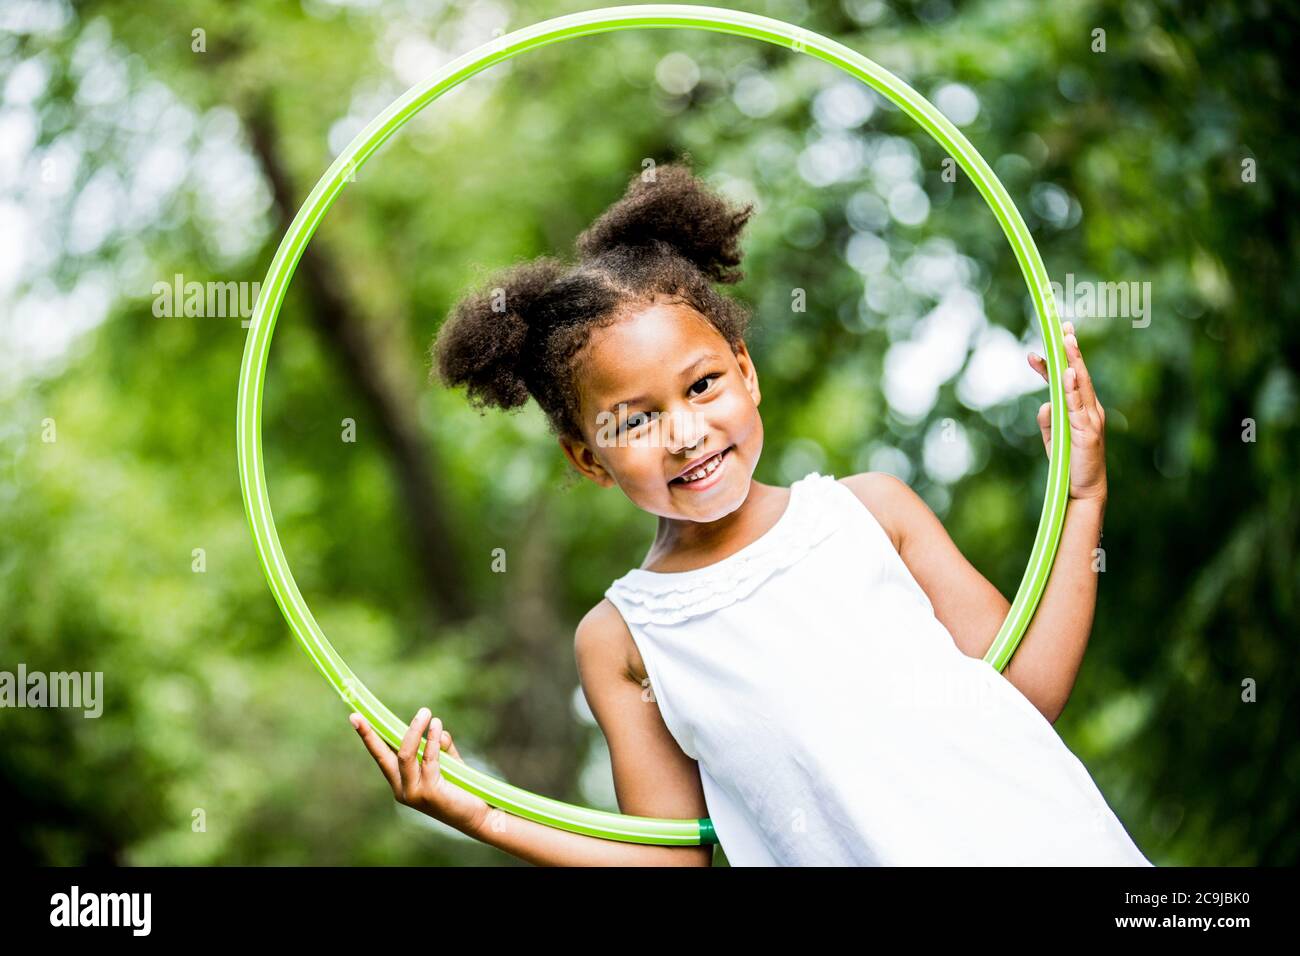 Girl playing with hula hoop in park, smiling, portrait. Stock Photo